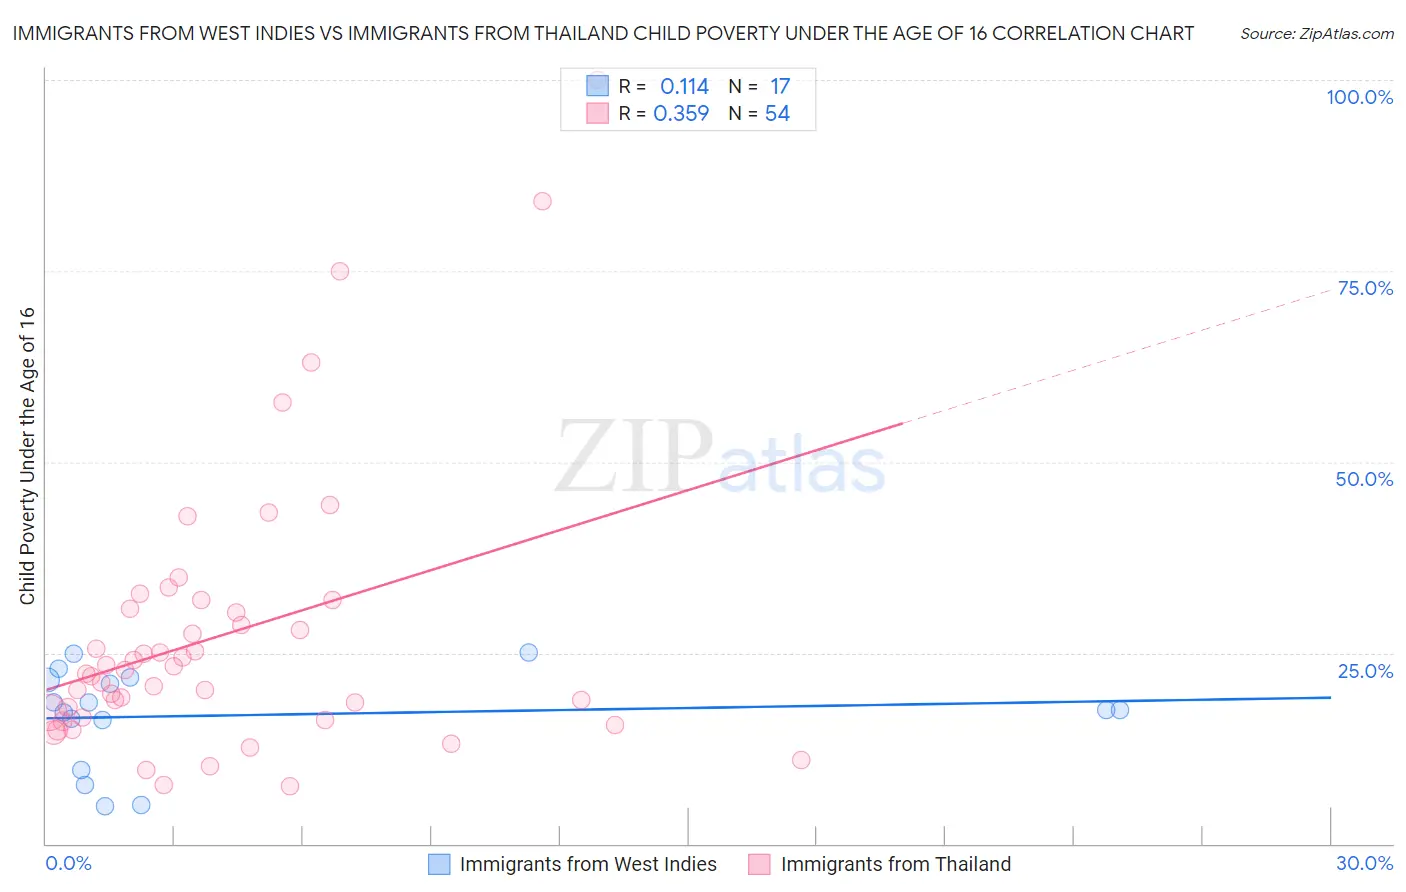 Immigrants from West Indies vs Immigrants from Thailand Child Poverty Under the Age of 16